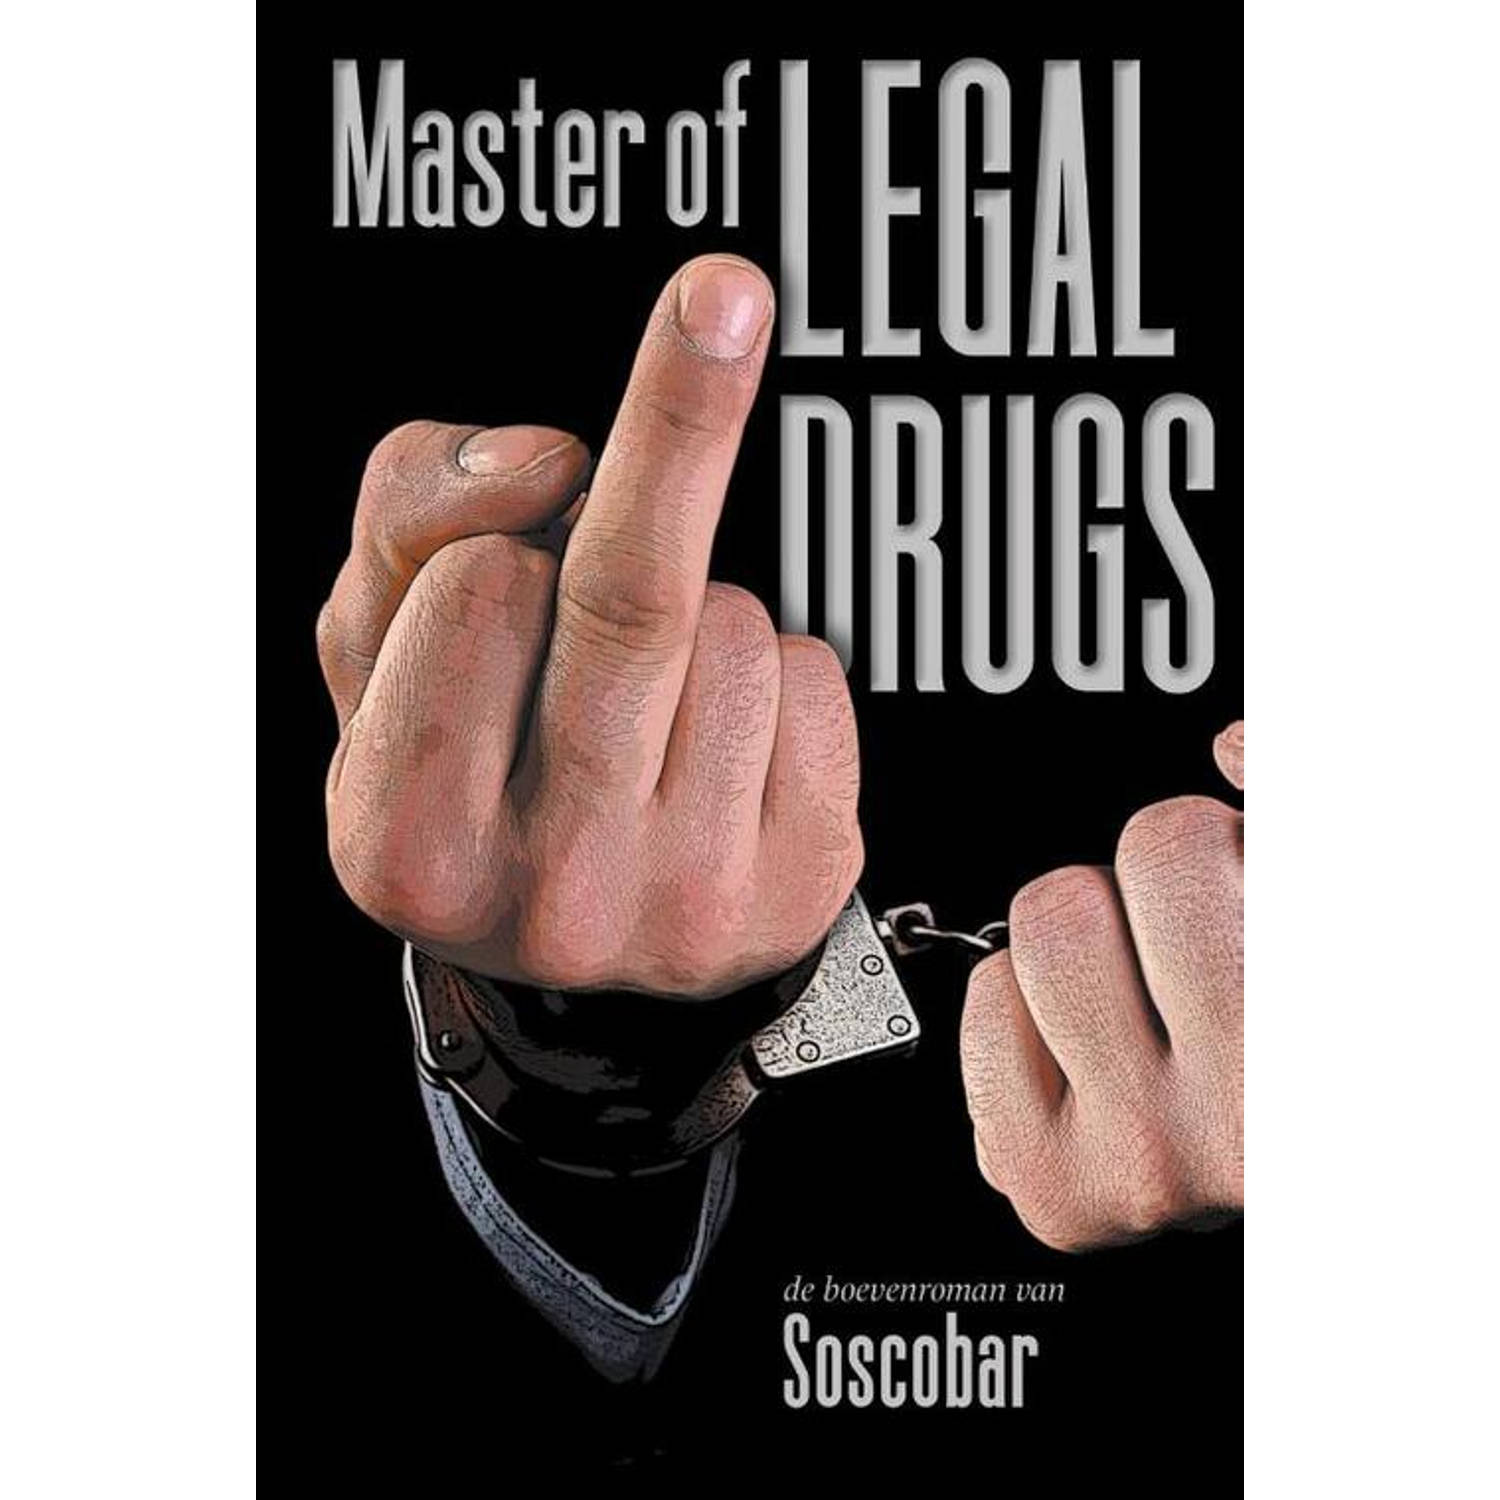 Master Of Legal Drugs